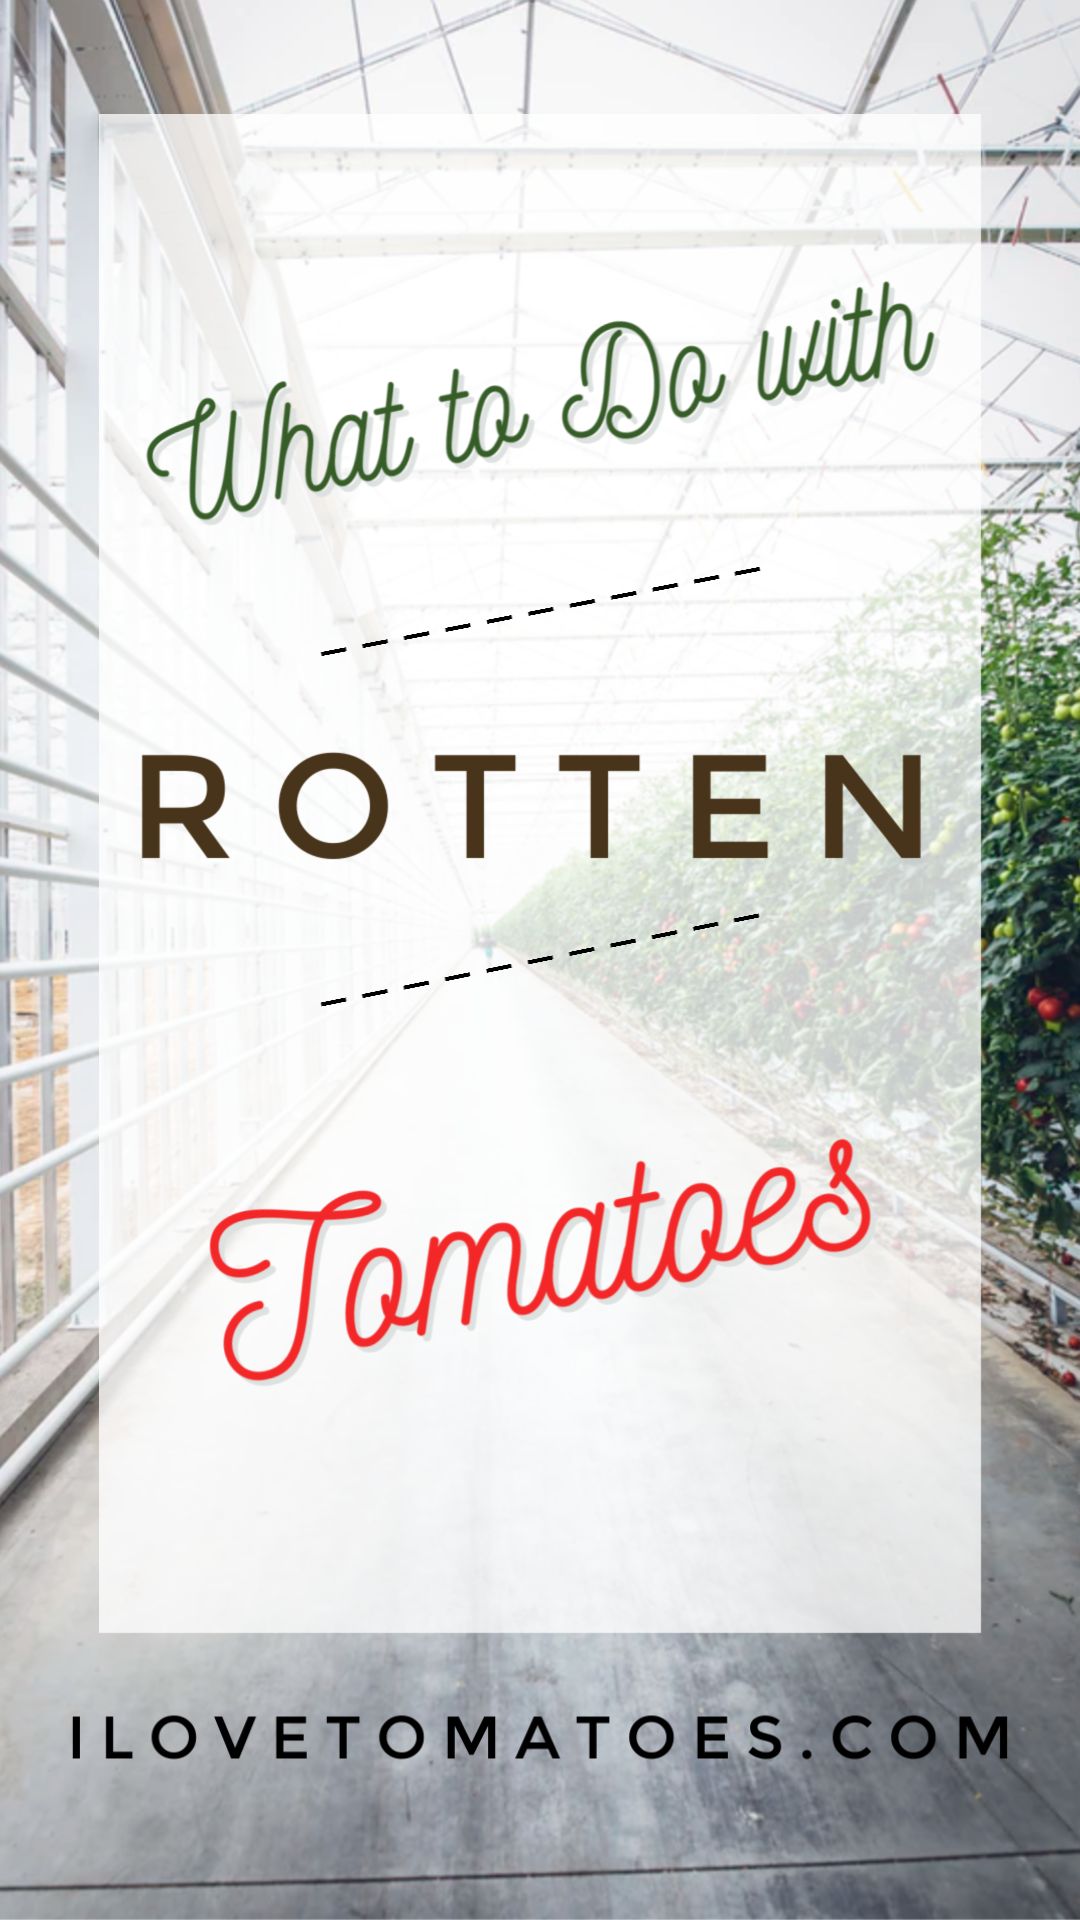 What do do with rotten tomatoes